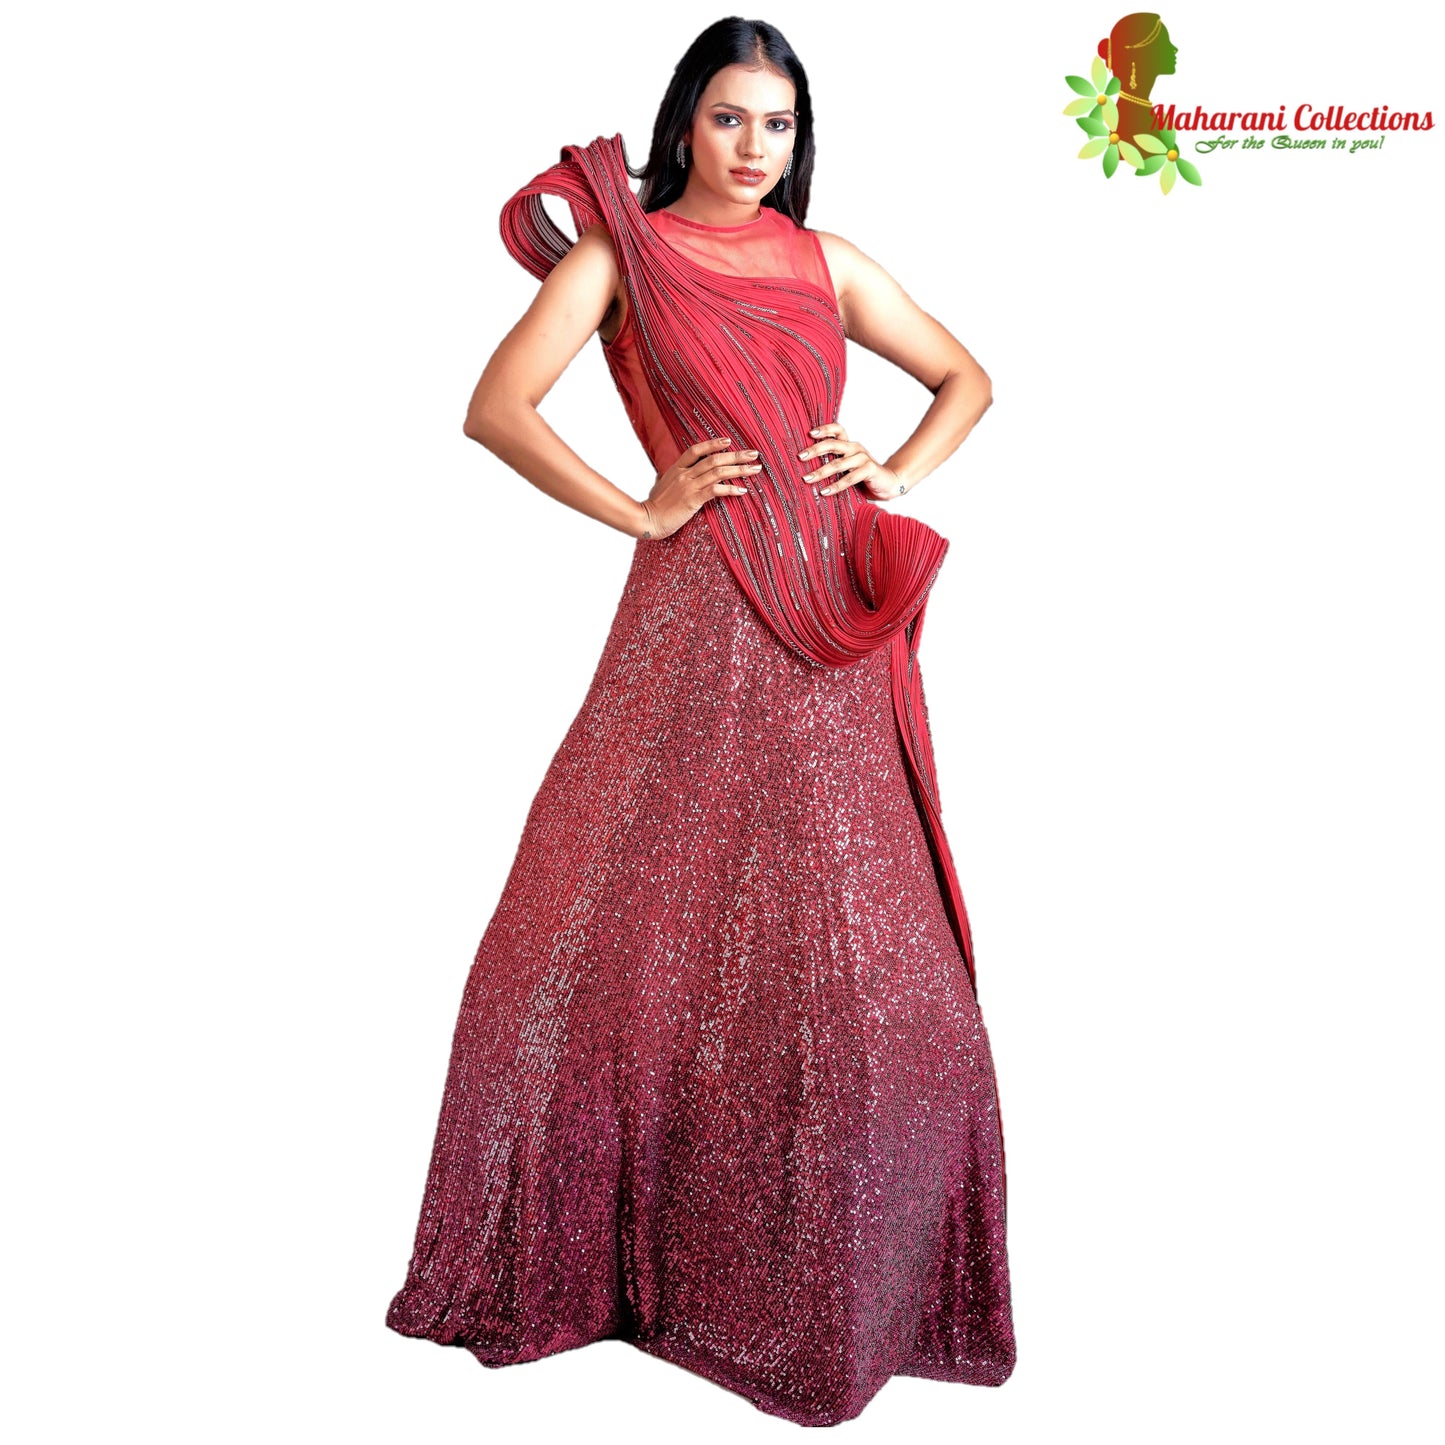 Maharani's Designer Ball (Princess) Gown - Wine color with Glittering Heavy Sequins Work